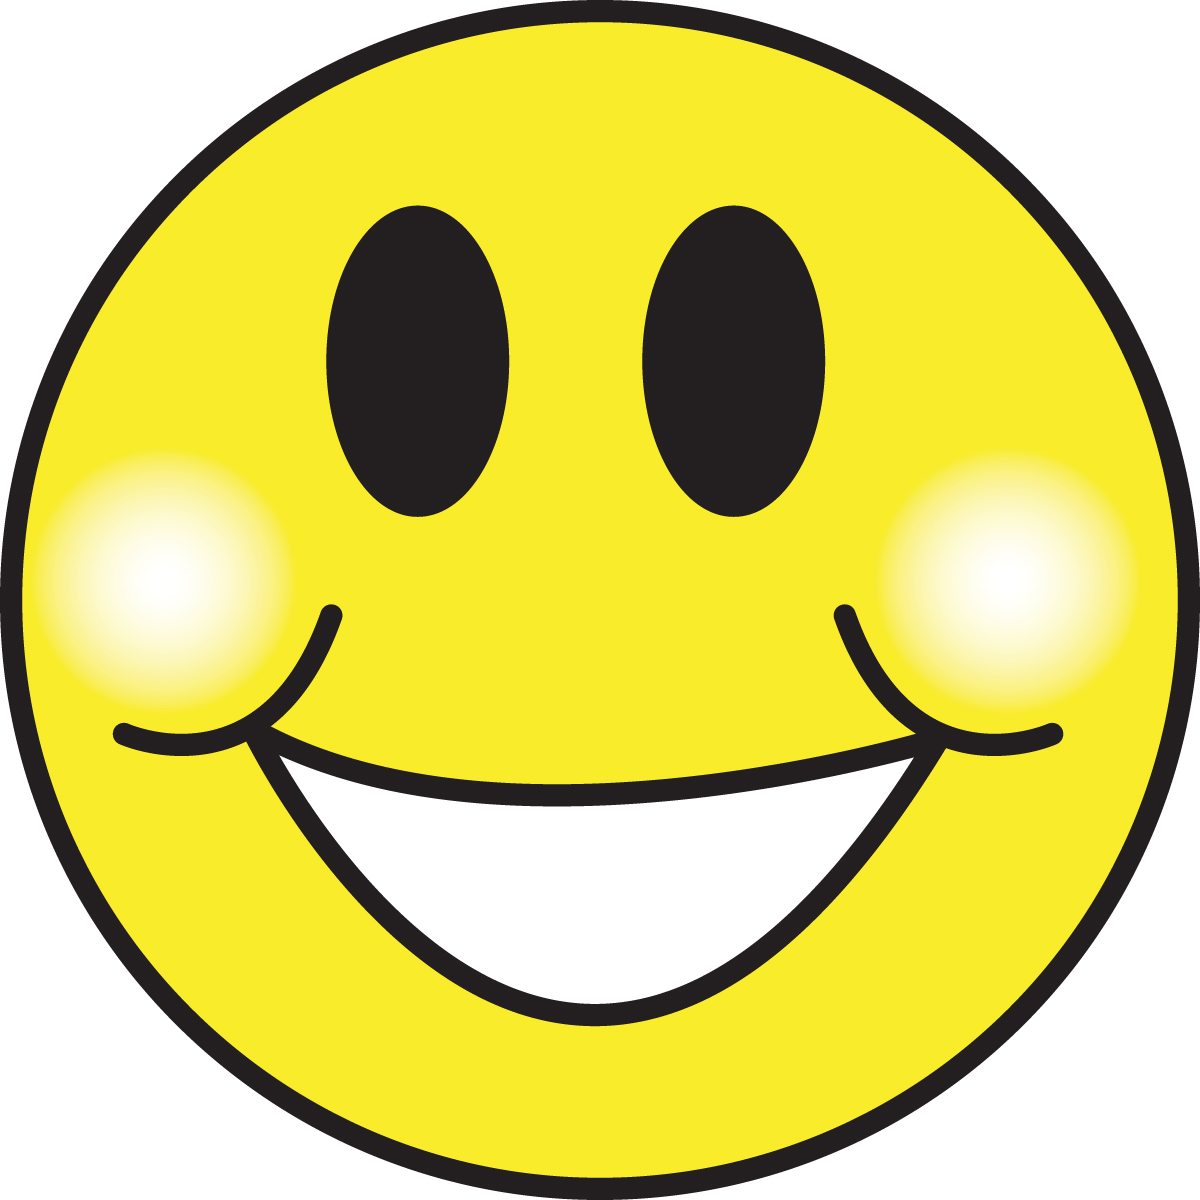 There Is 40 Crazy Smiley Face   Free Cliparts All Used For Free